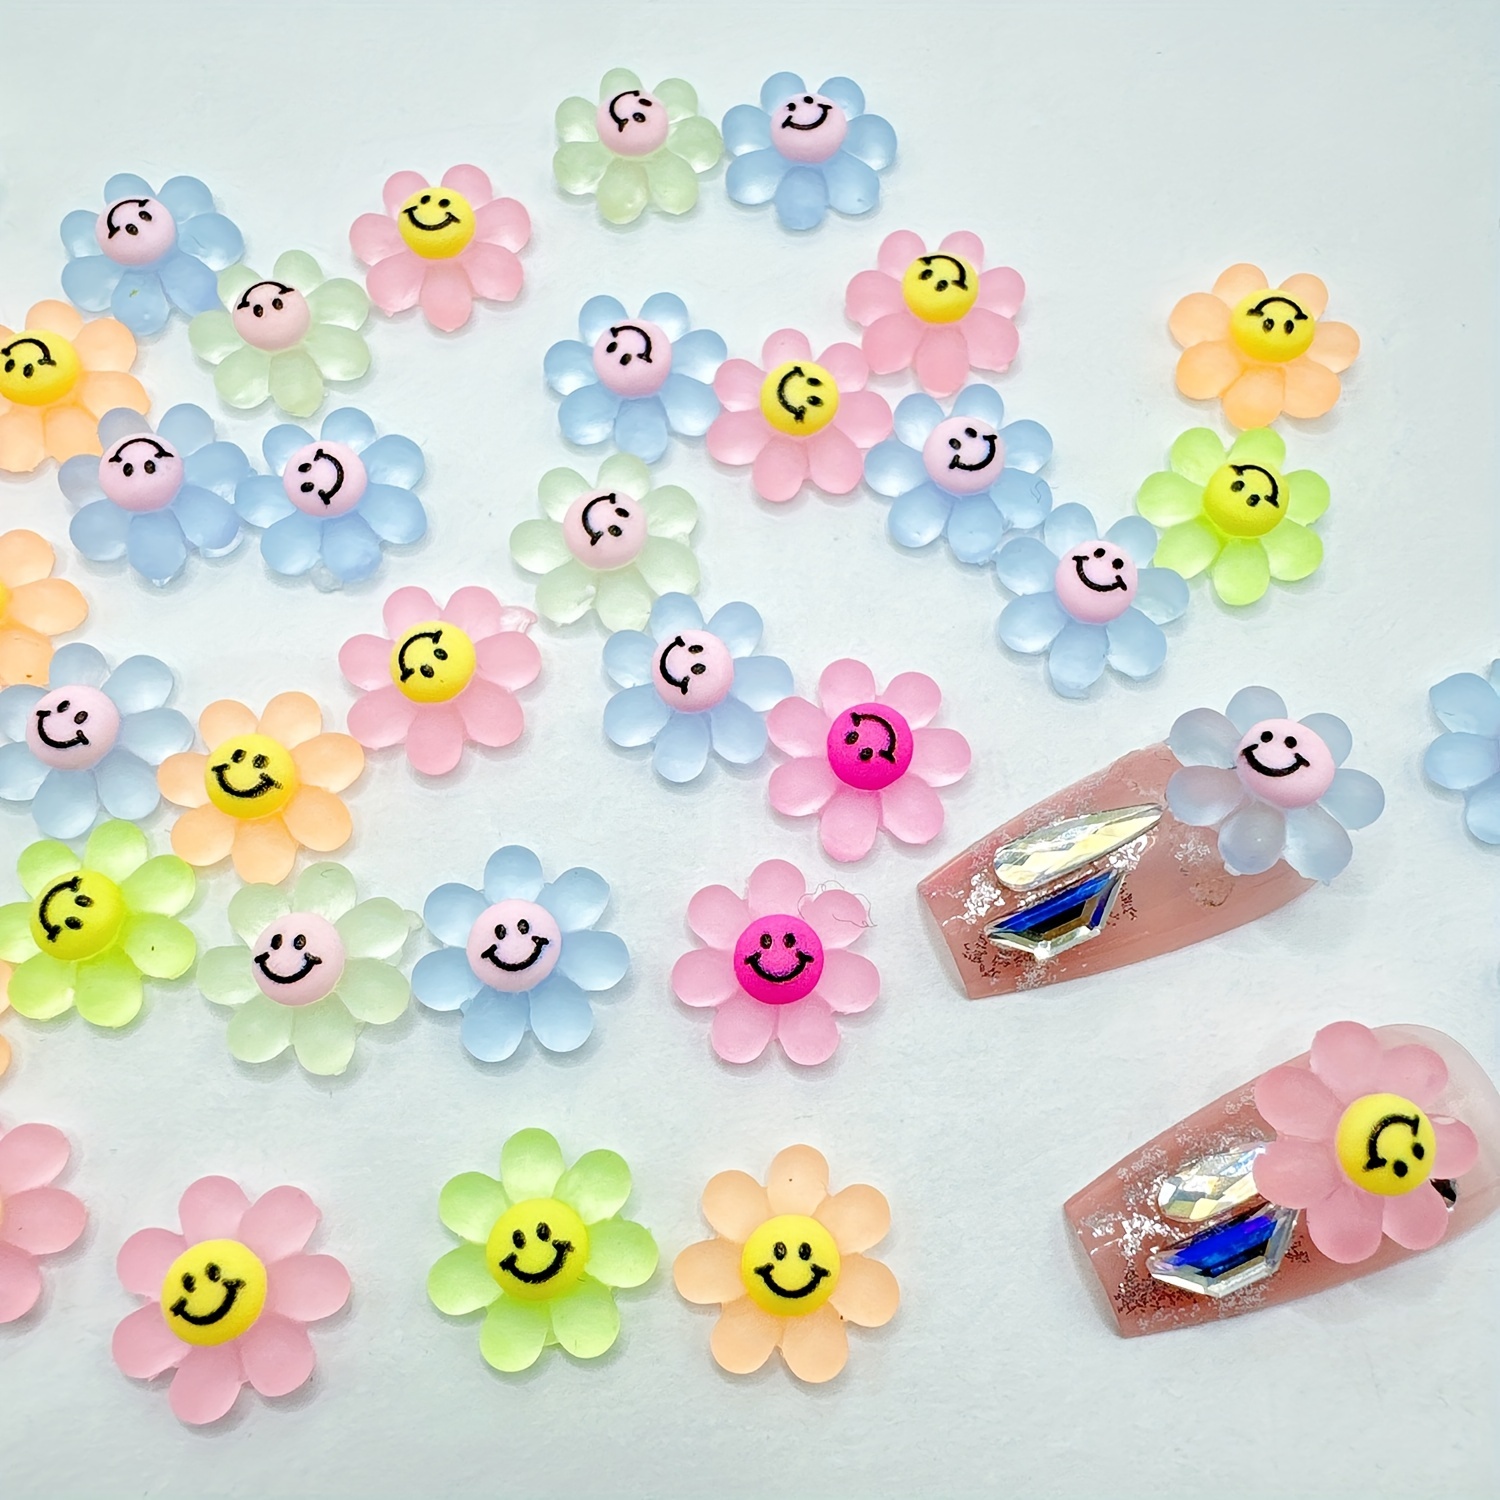 

50pcs Resin Cute Mini Smiling Face Flower Scrapbook Rhinestones 3d Nail Charms For Women Girls Nail Charms Manicure Decorations Jewelry Accessories